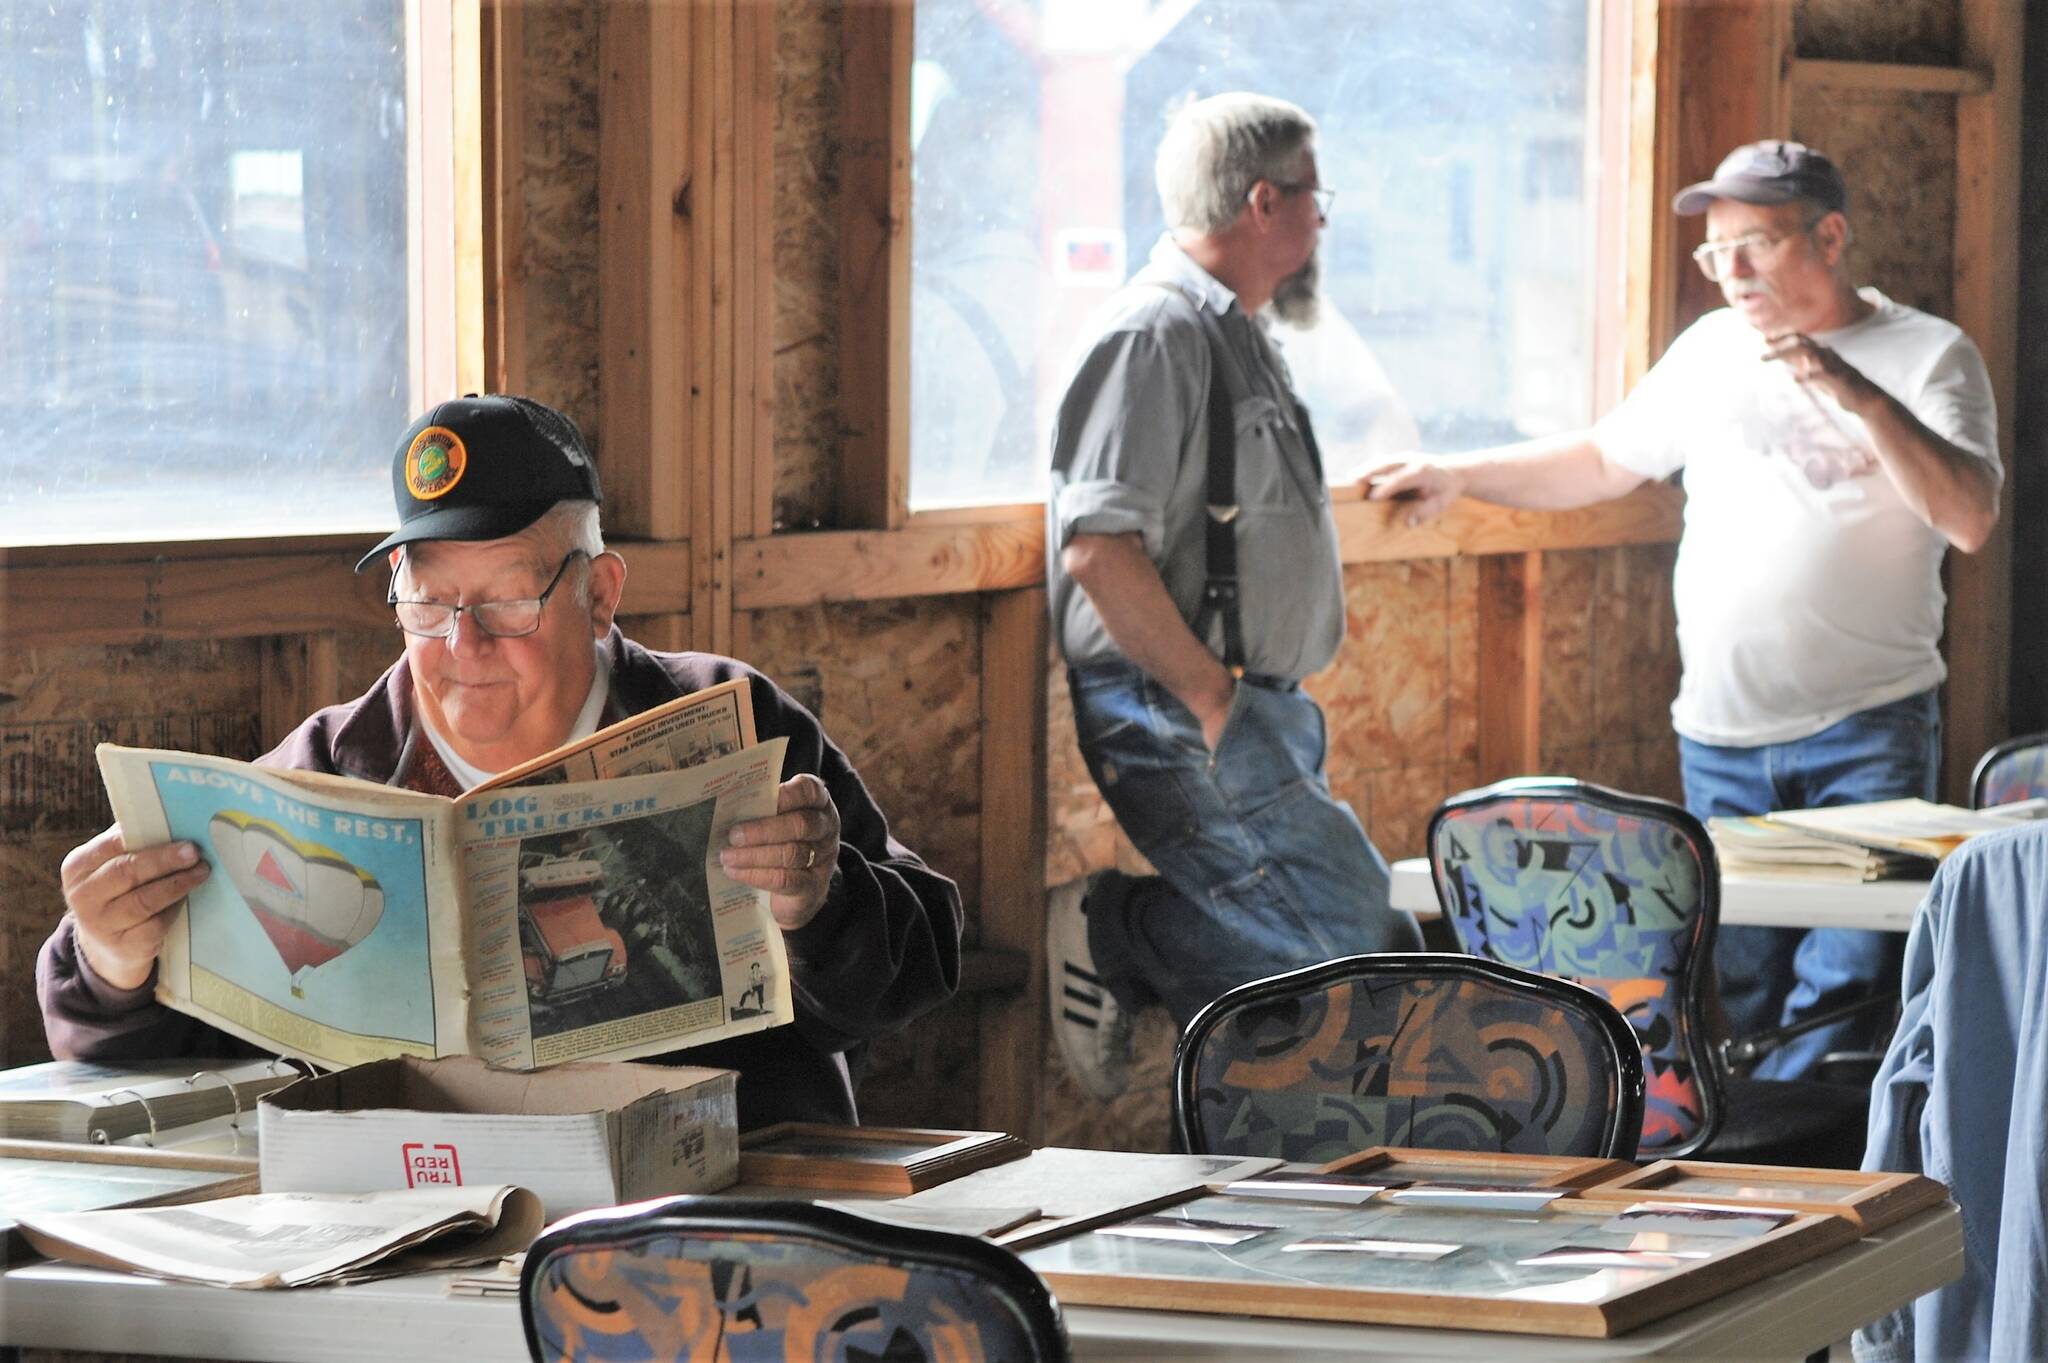 Barry Swanson reads of old-time log trucking while Joe Gaydeski and Pat Ruble share stories of the past.